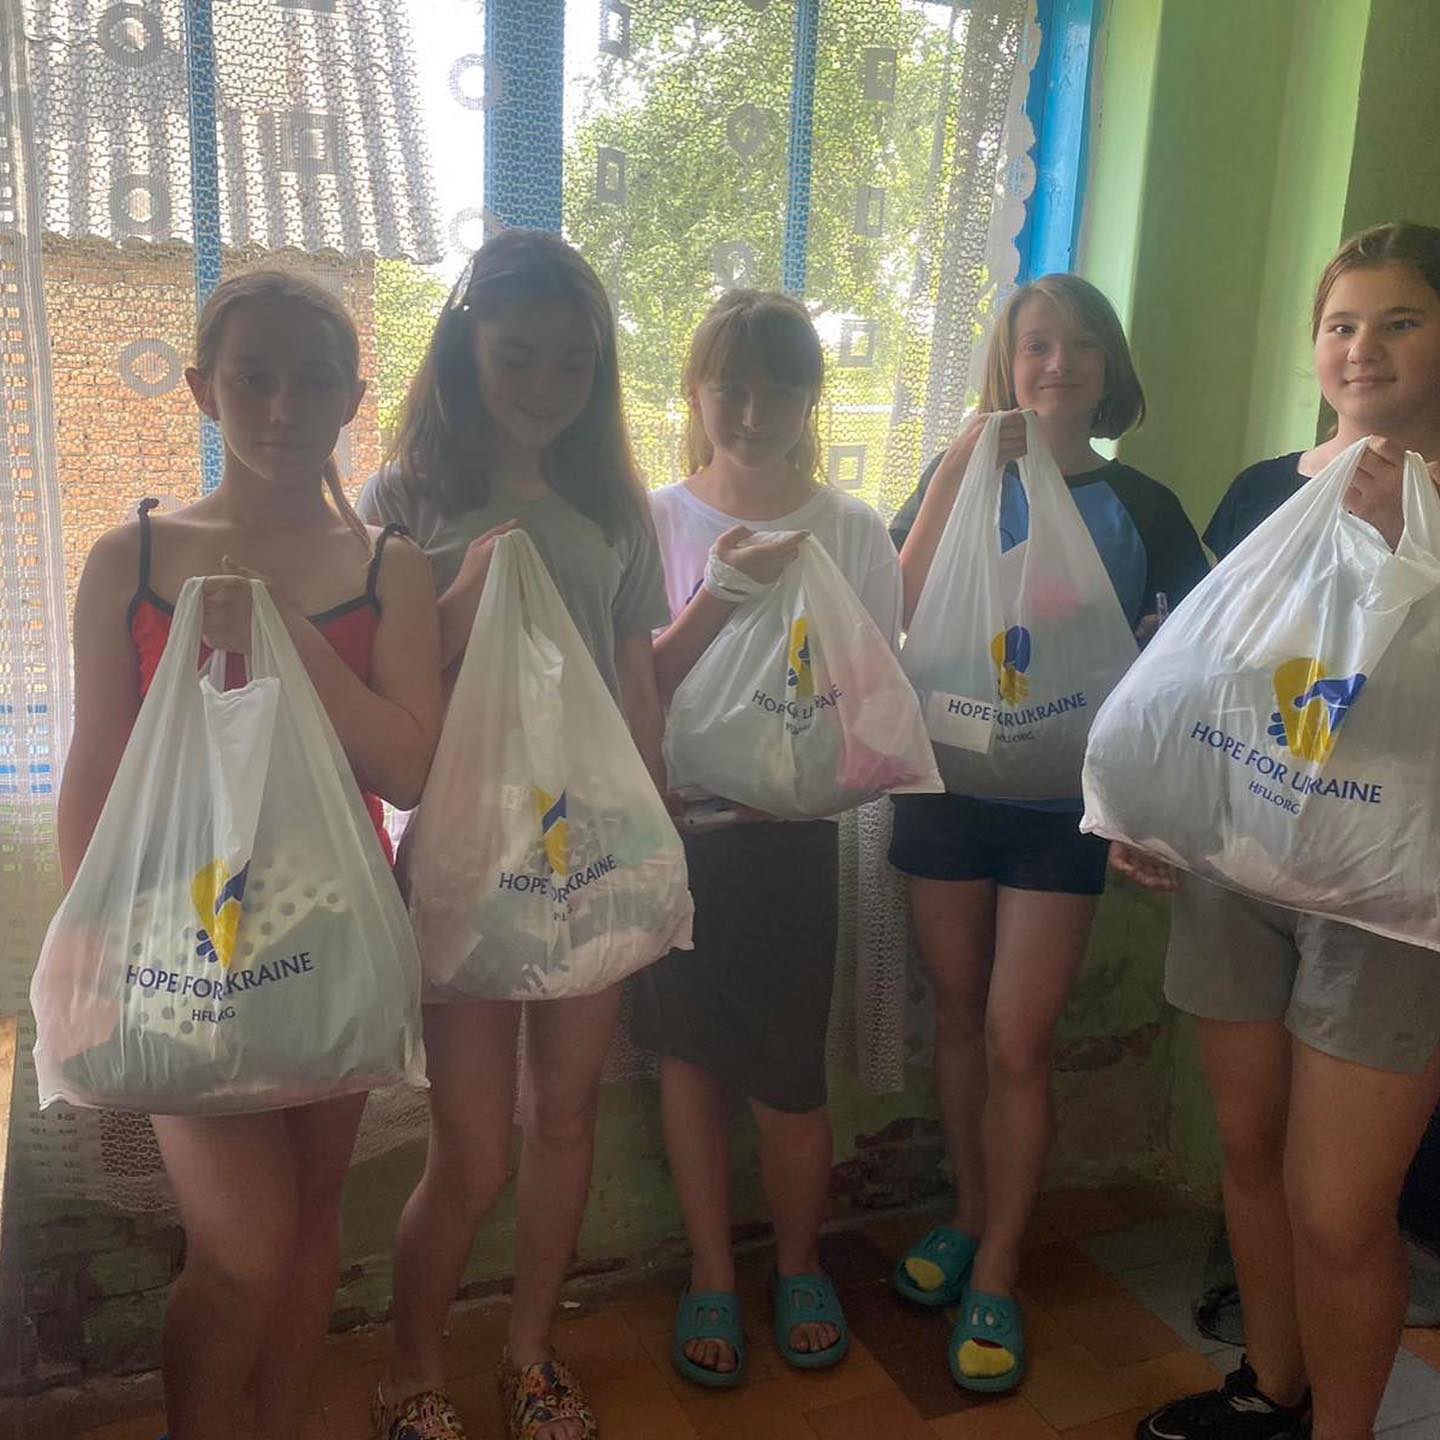 A group of girls holding shopping bags in front of a window.